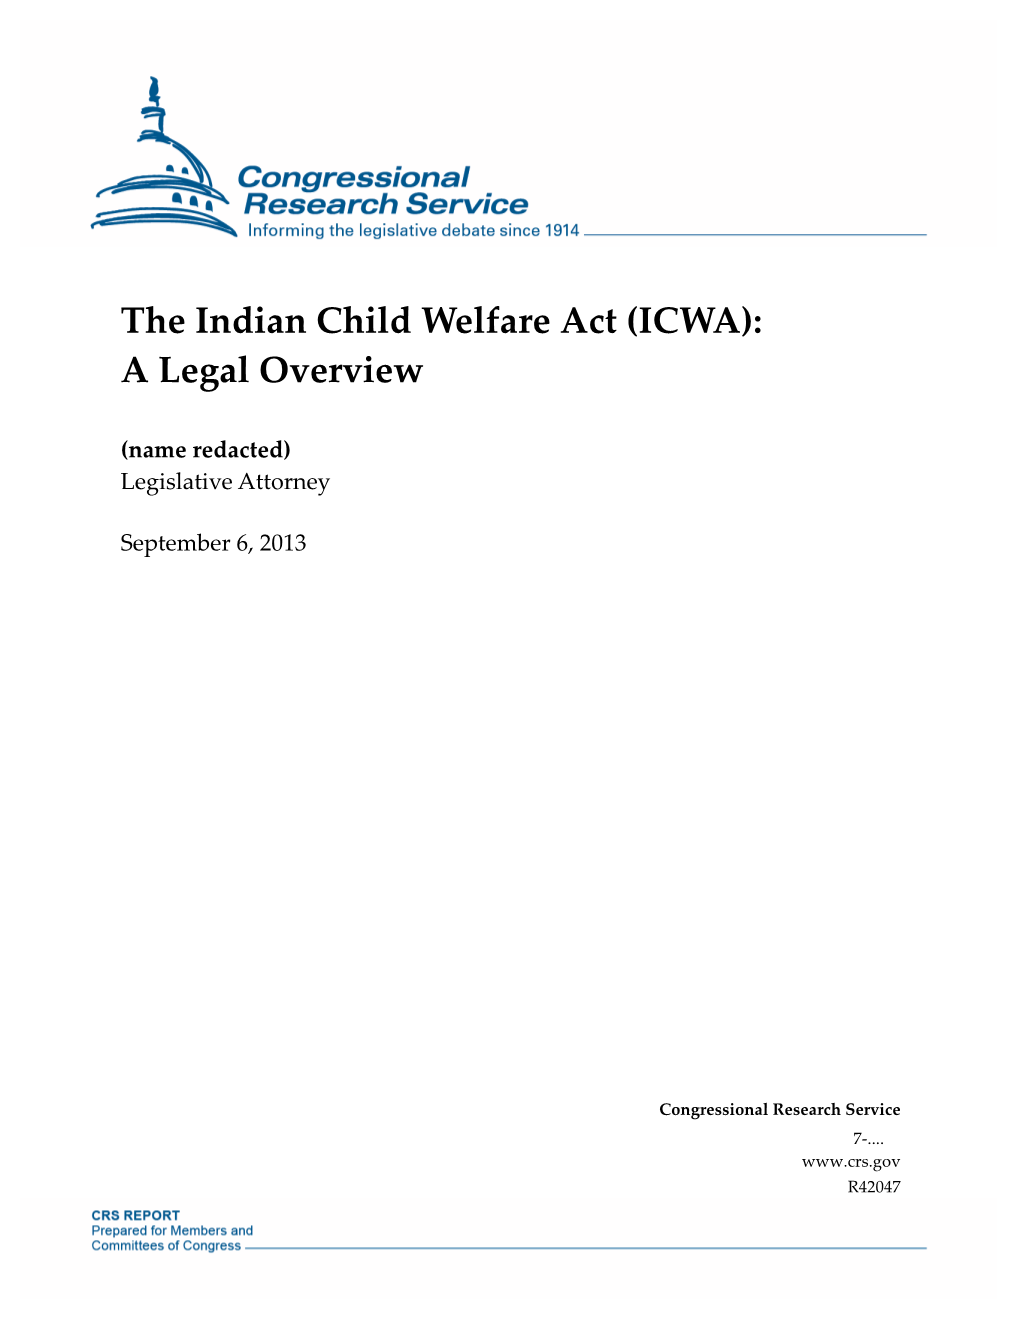 The Indian Child Welfare Act (ICWA): a Legal Overview